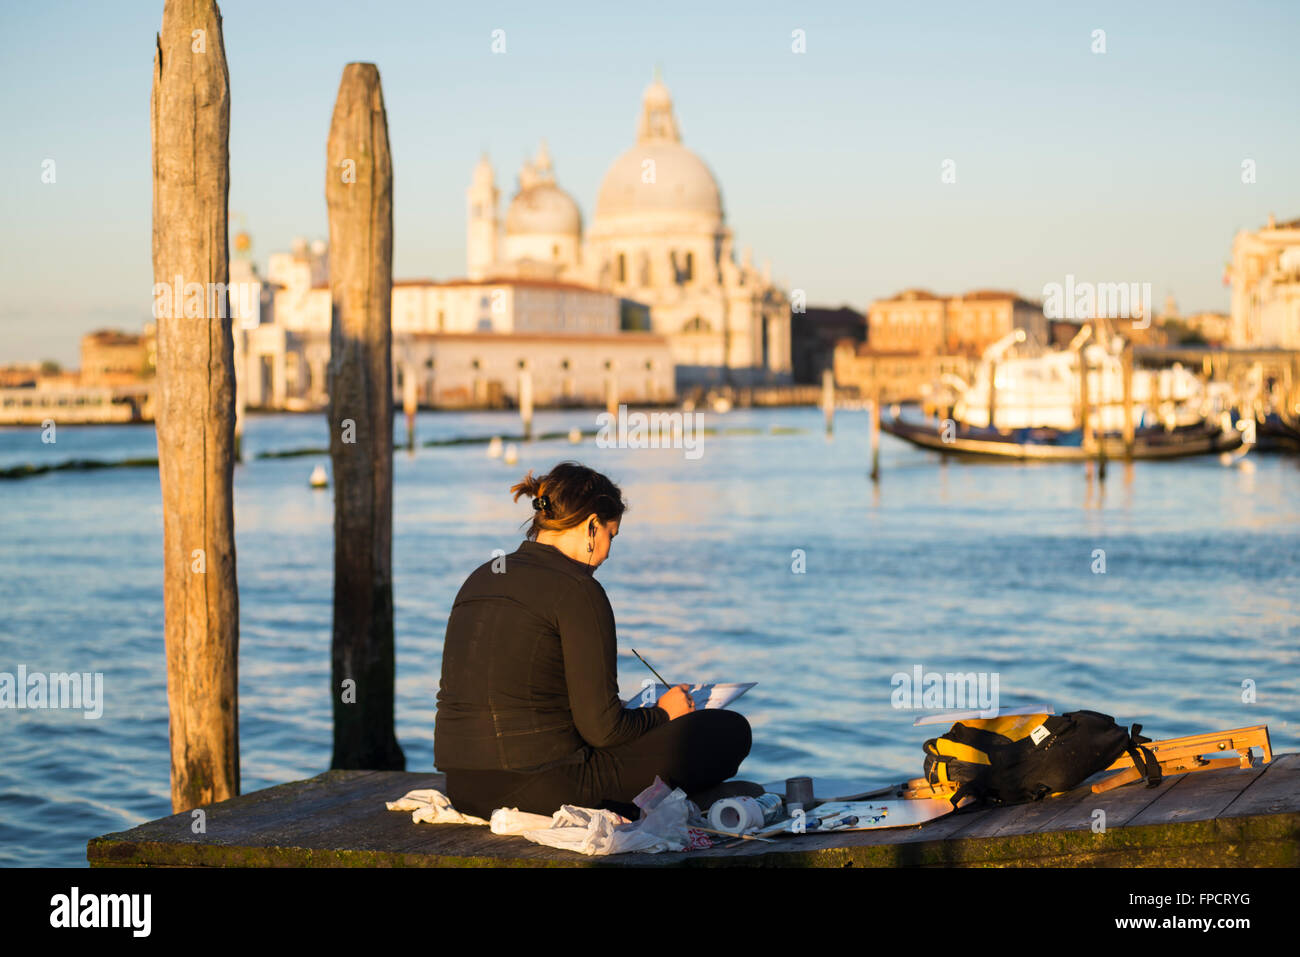 Woman sitting on a jetty near the St. Mark's Square at sunrise painting the cityscape of Venice at the Grand Canal Stock Photo